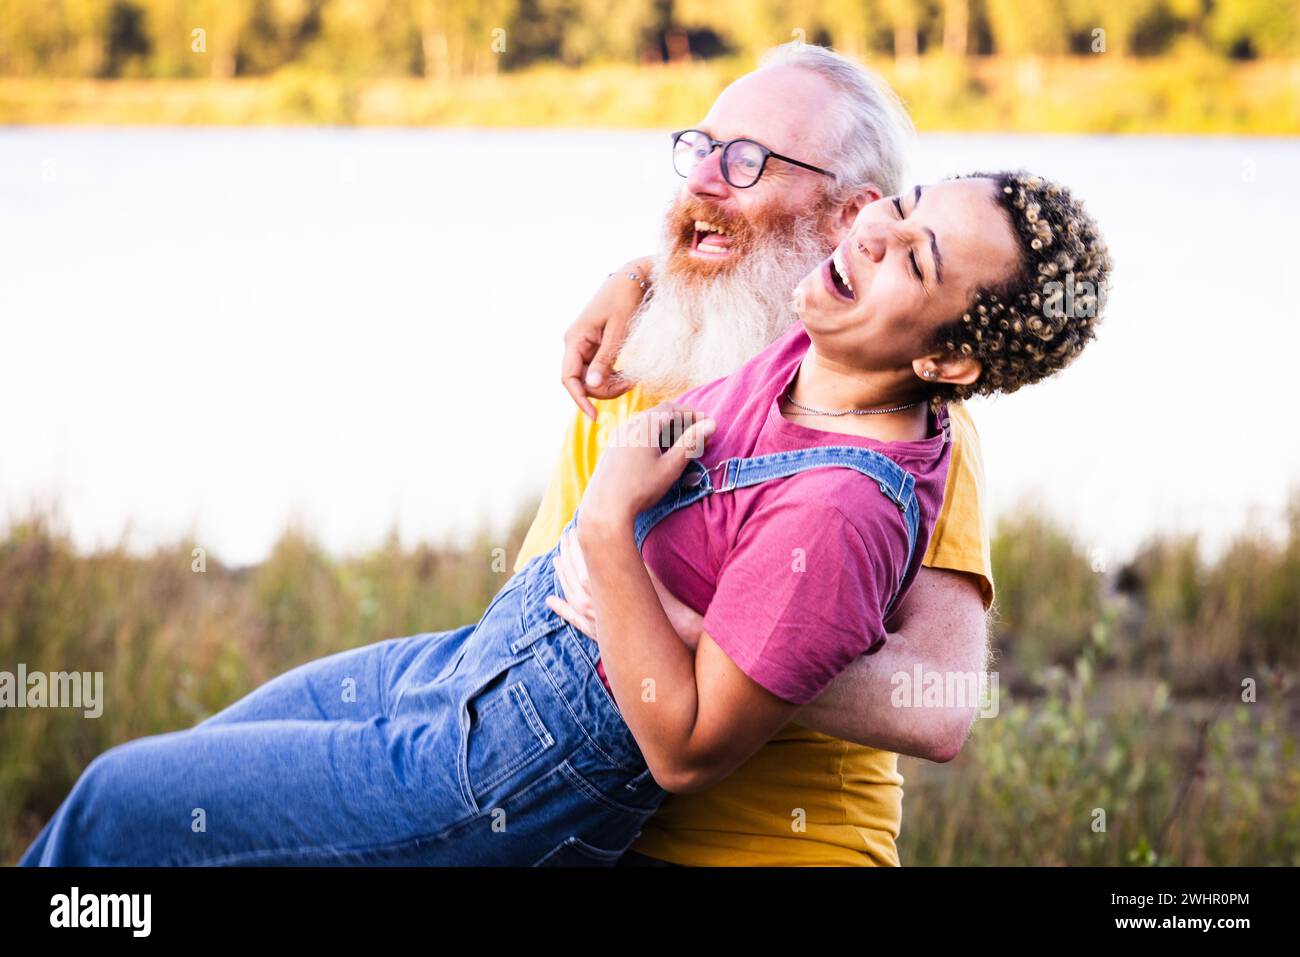 Carefree Moments: Laughter Under Open Skies Stock Photo